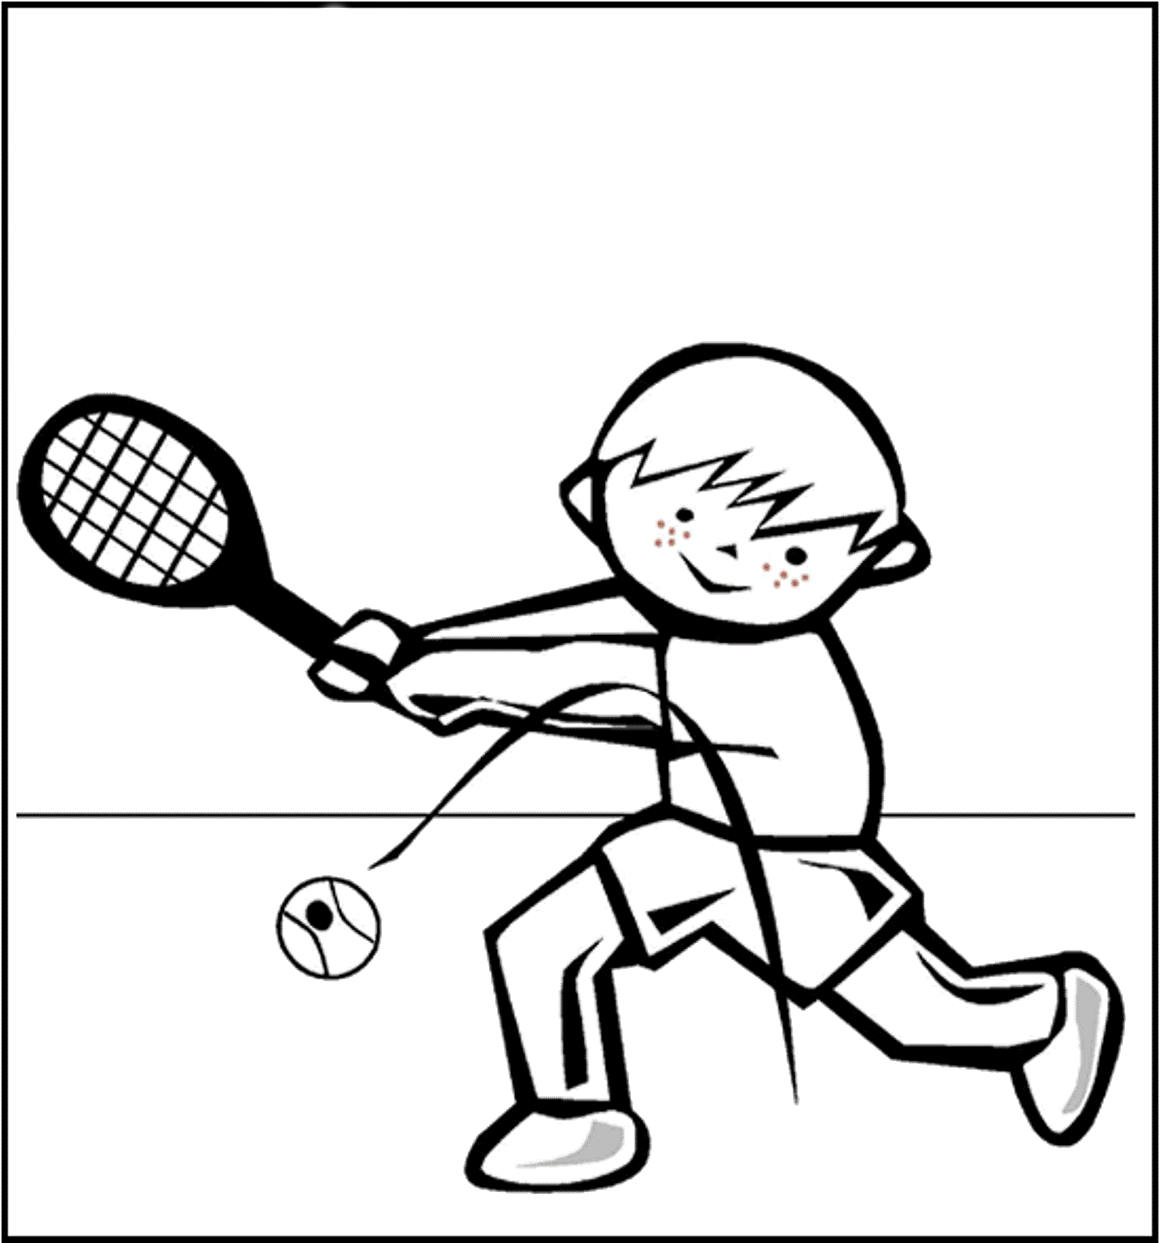 Sports Photograph Coloring Pages Kids: Tennis Coloring Pages Printable